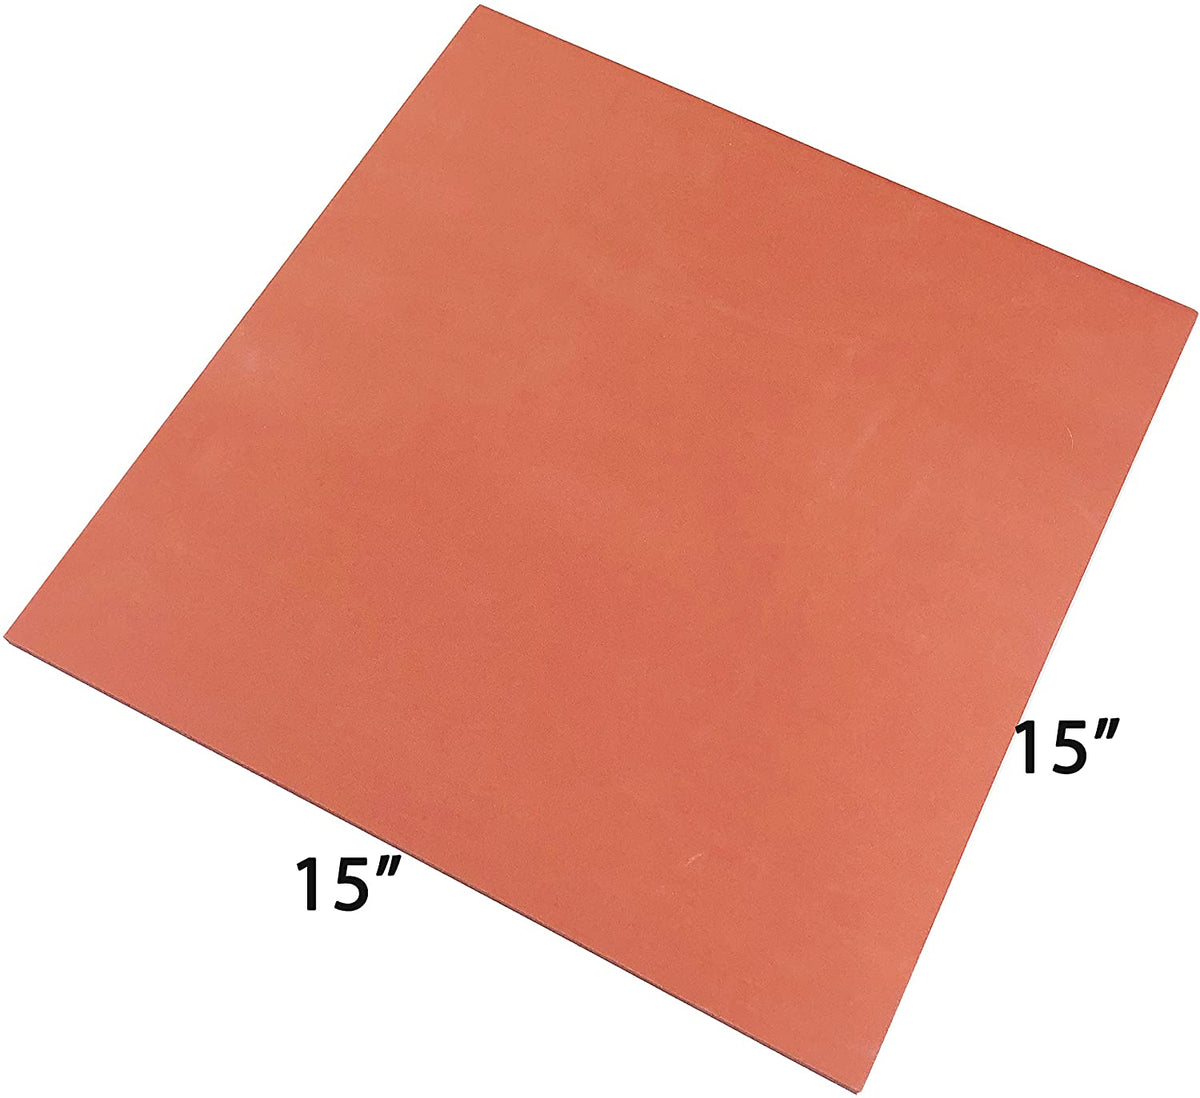 15 x 15” Silicone Heat Press Pad Mat Silicone Pad for Heat Transfer  Machine Press Replacement Pad